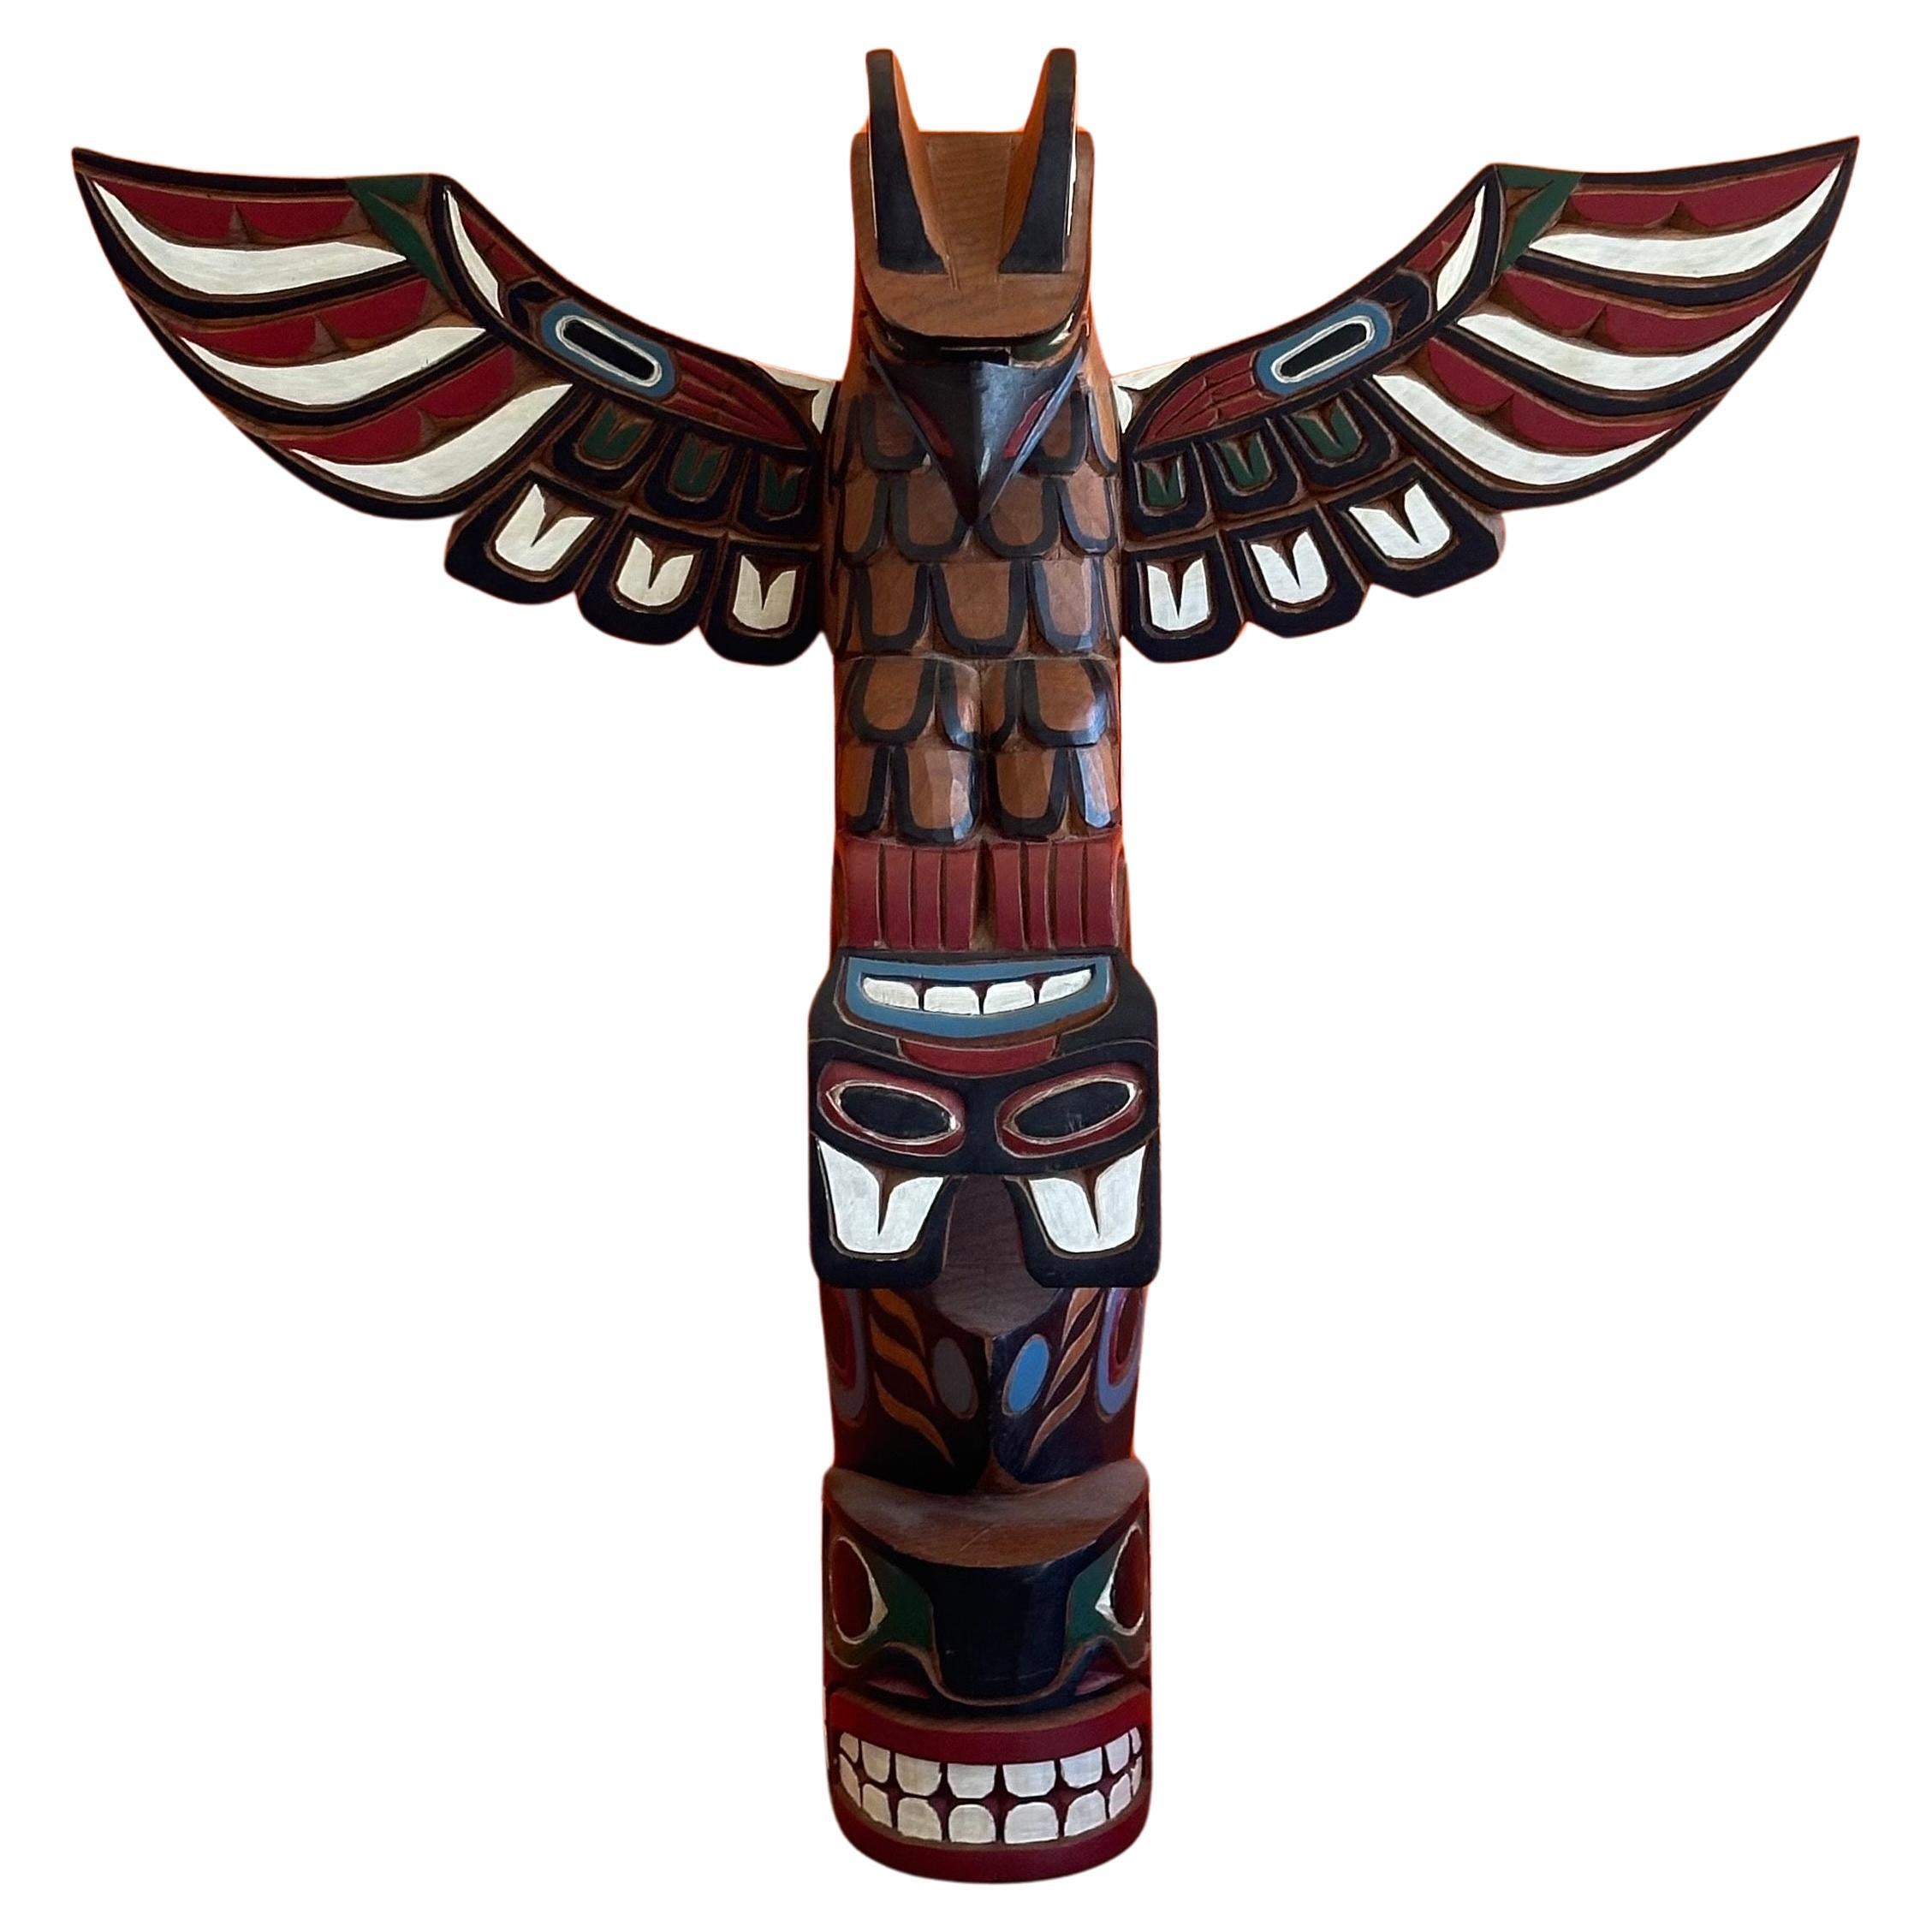  Northwest Coast American Indian Hand Carved Wood Totem Pole by Gary Rice For Sale 6